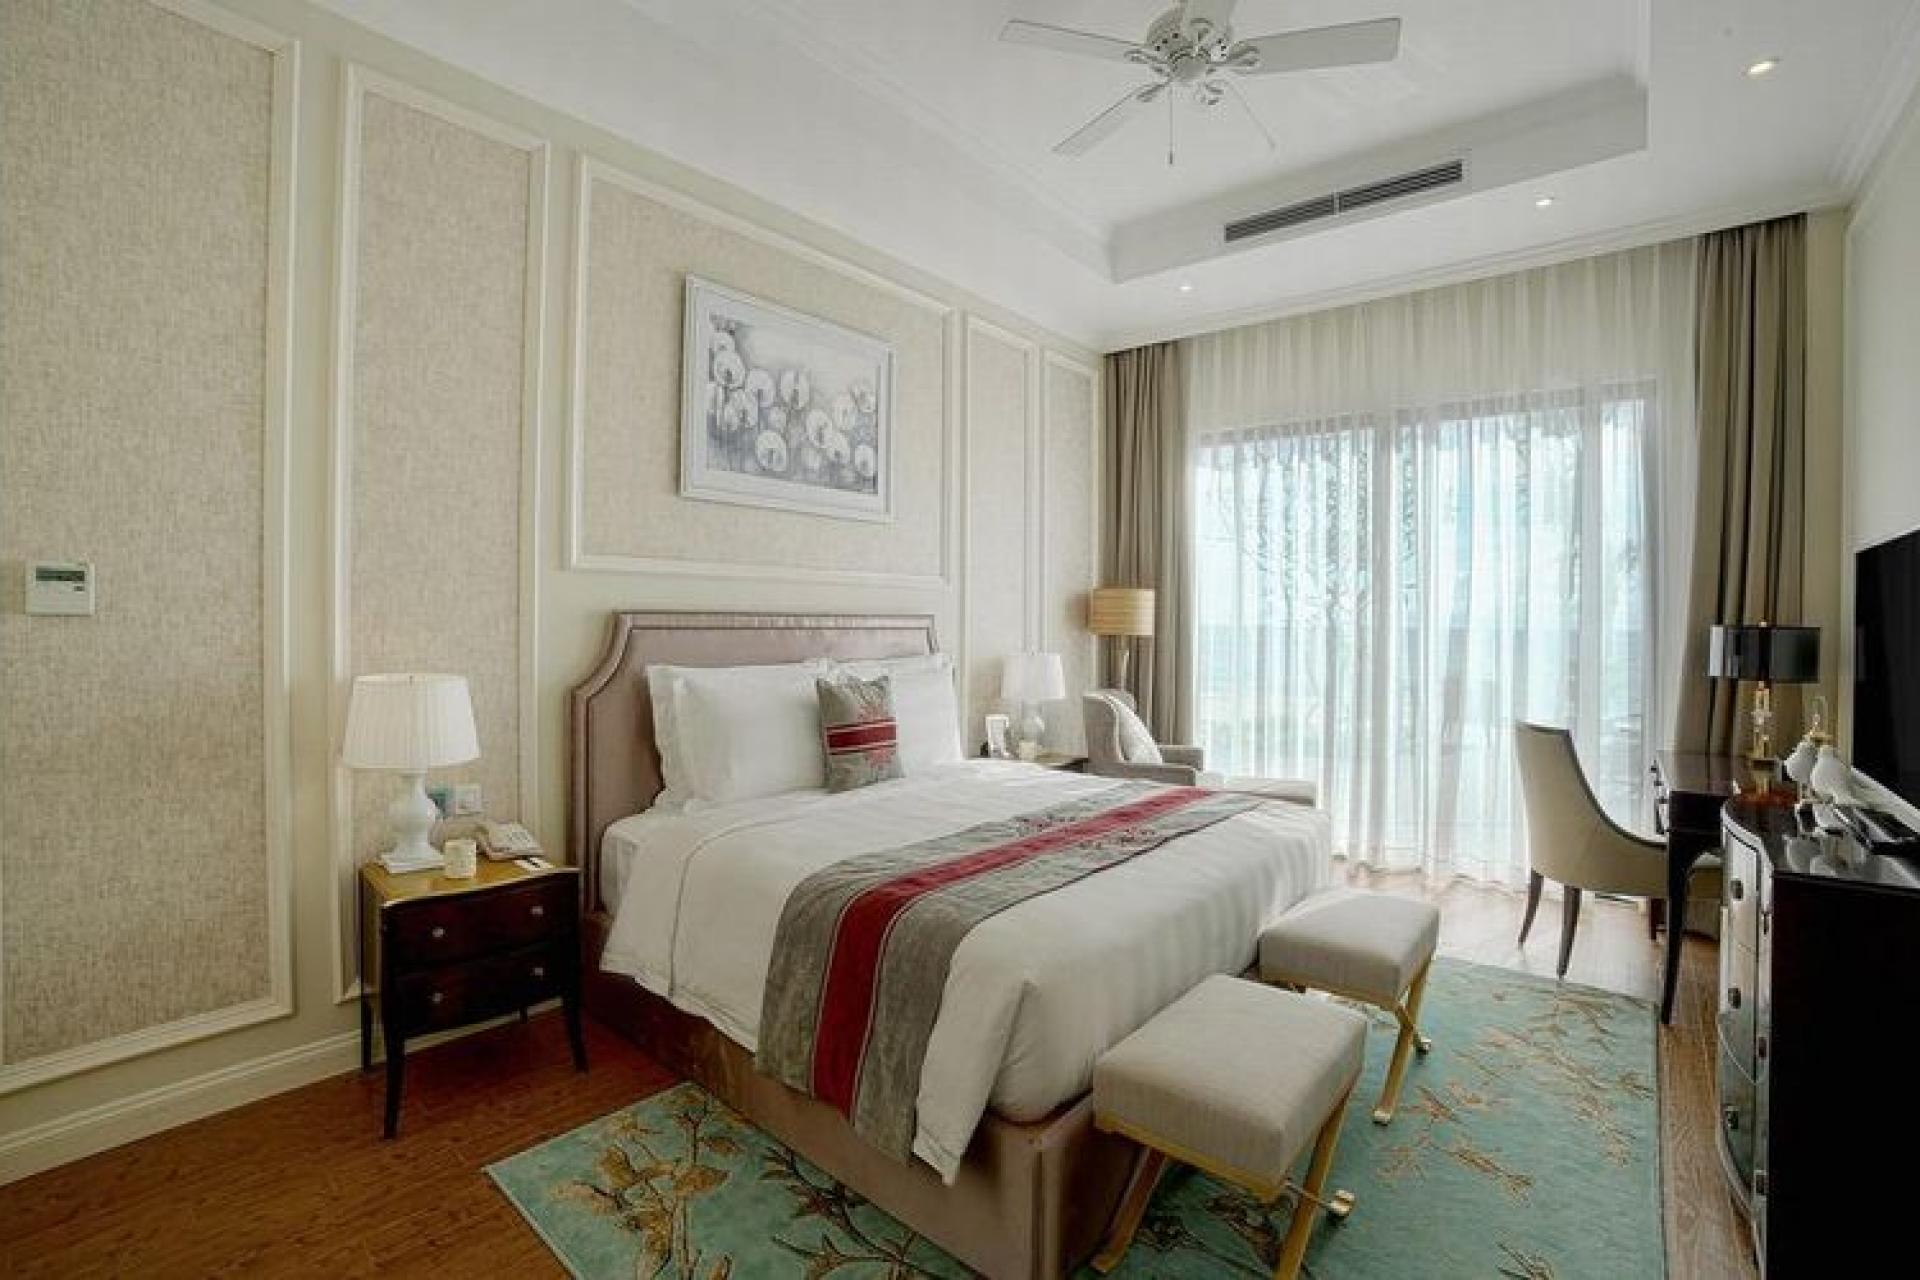 VINPEARL DISCOVERY CỬA HỘI 9